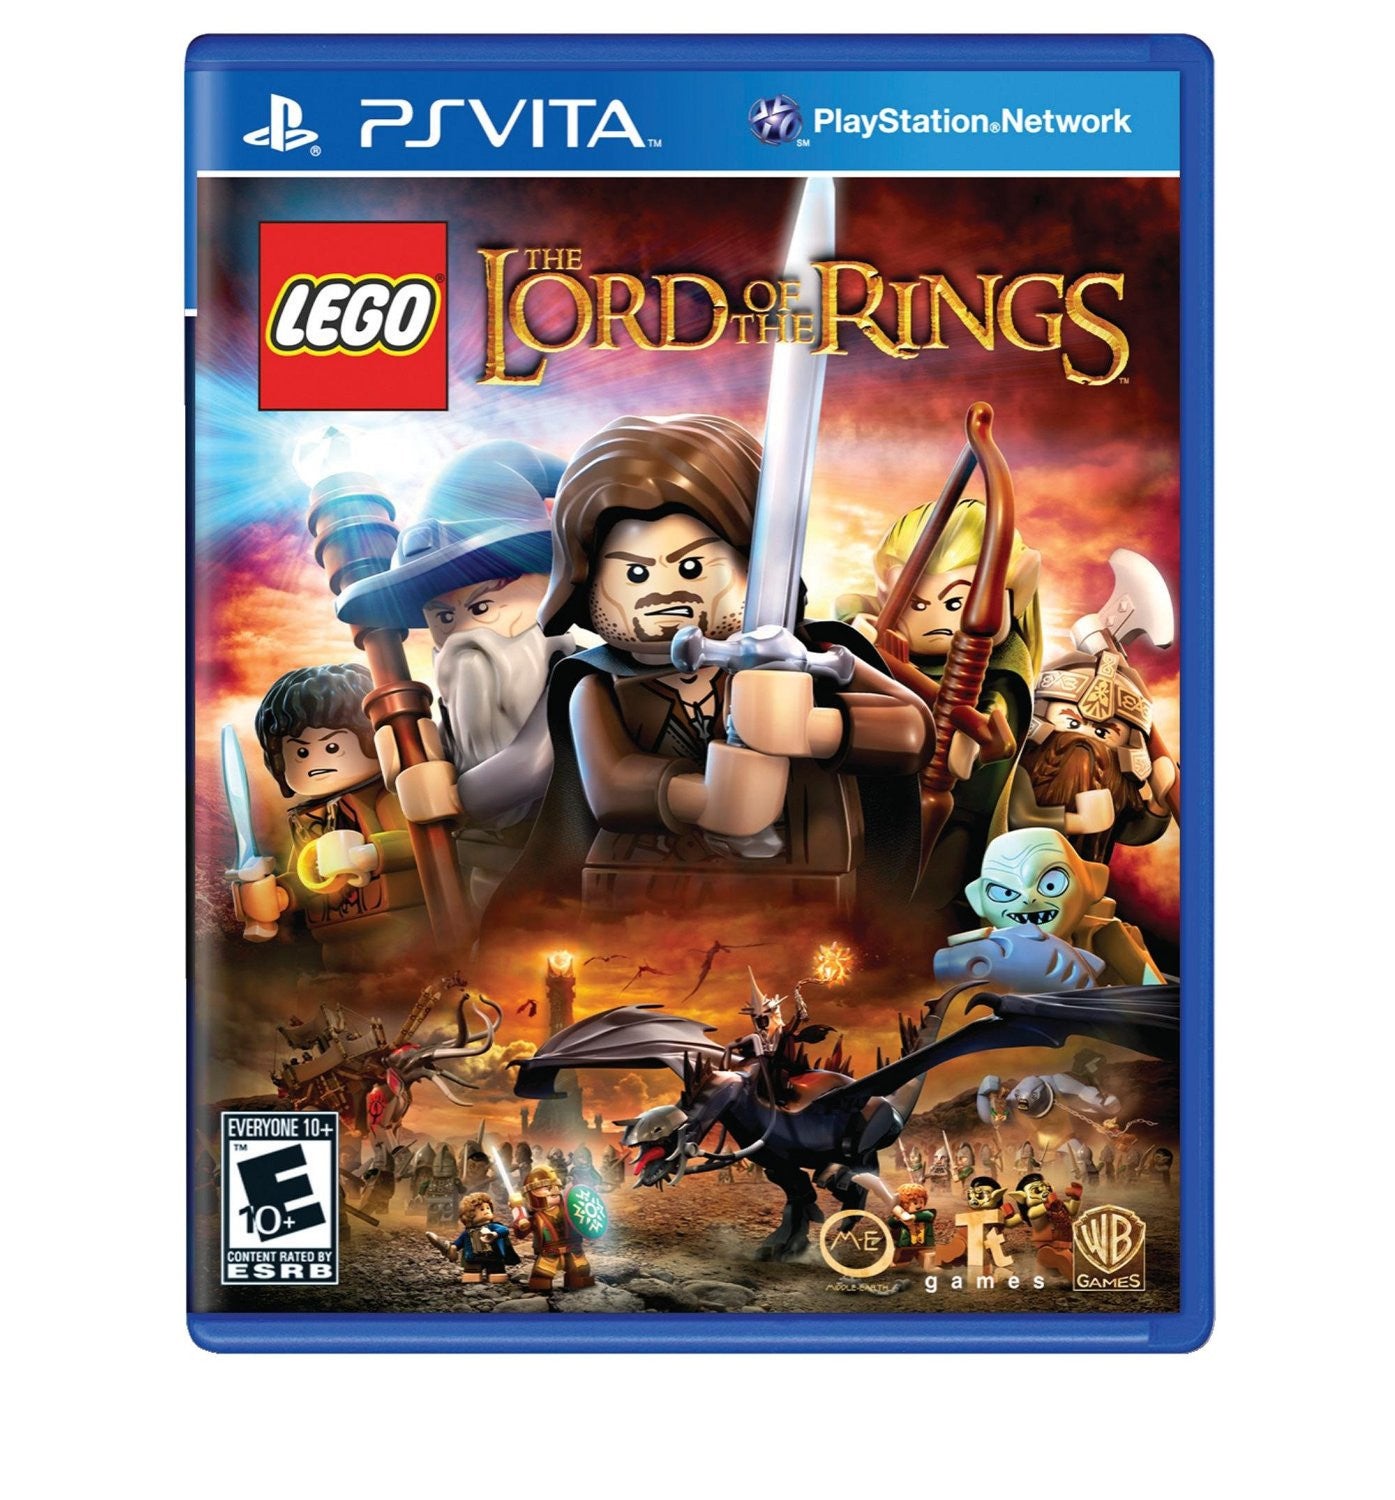 LEGO Lord of the Rings - PlayStation Vita